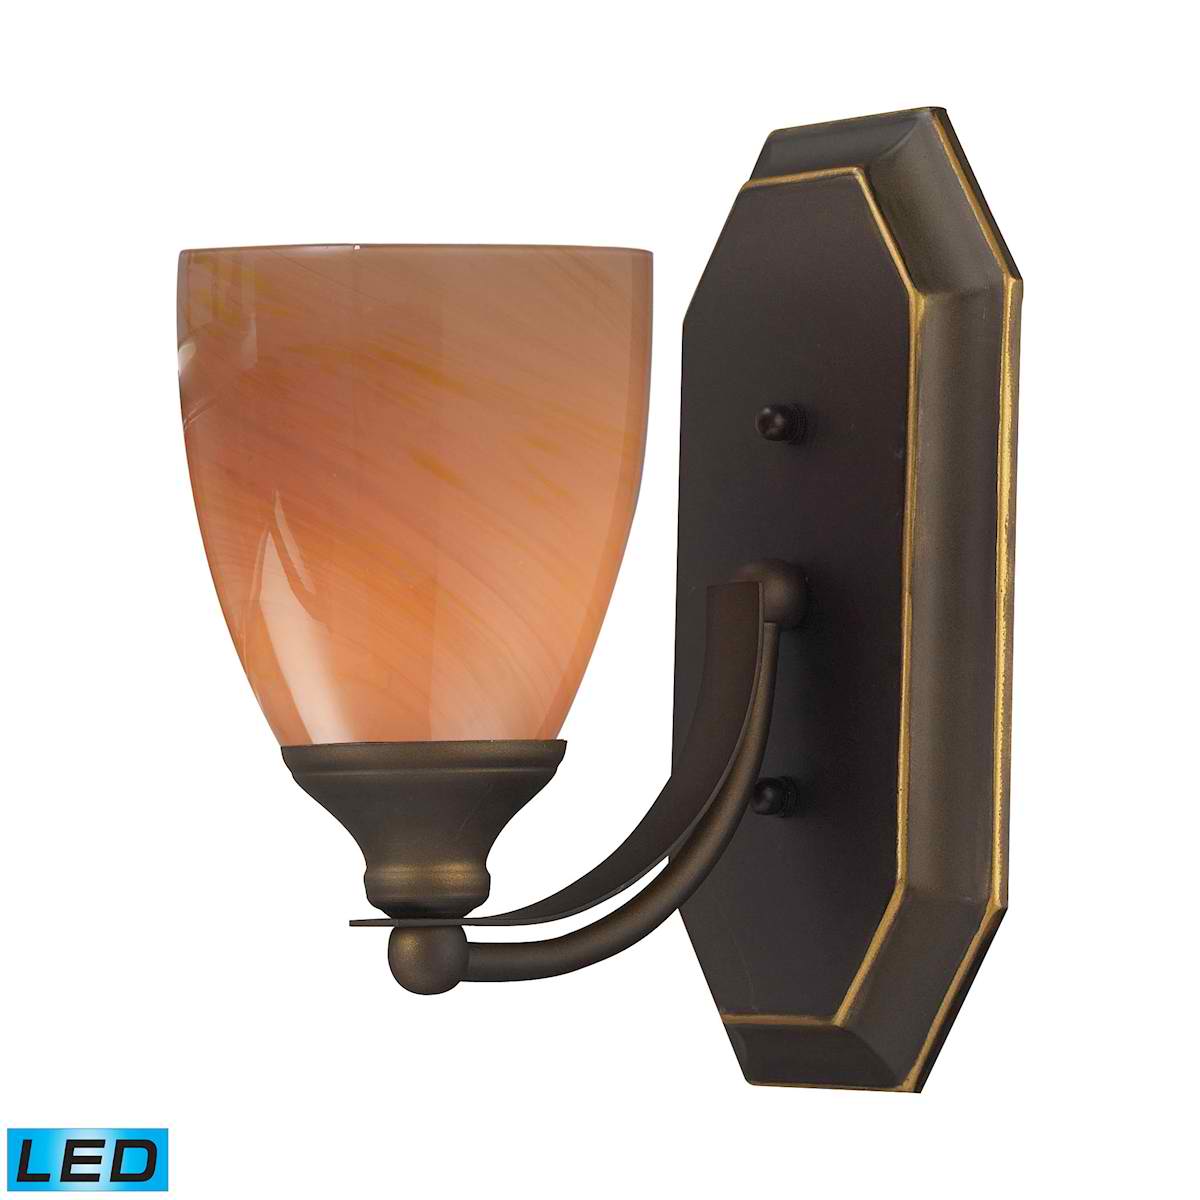 1 Light Vanity in Aged Bronze and Sandy Glass - LED Offering Up To 800 Lumens (60 Watt Equivalent)